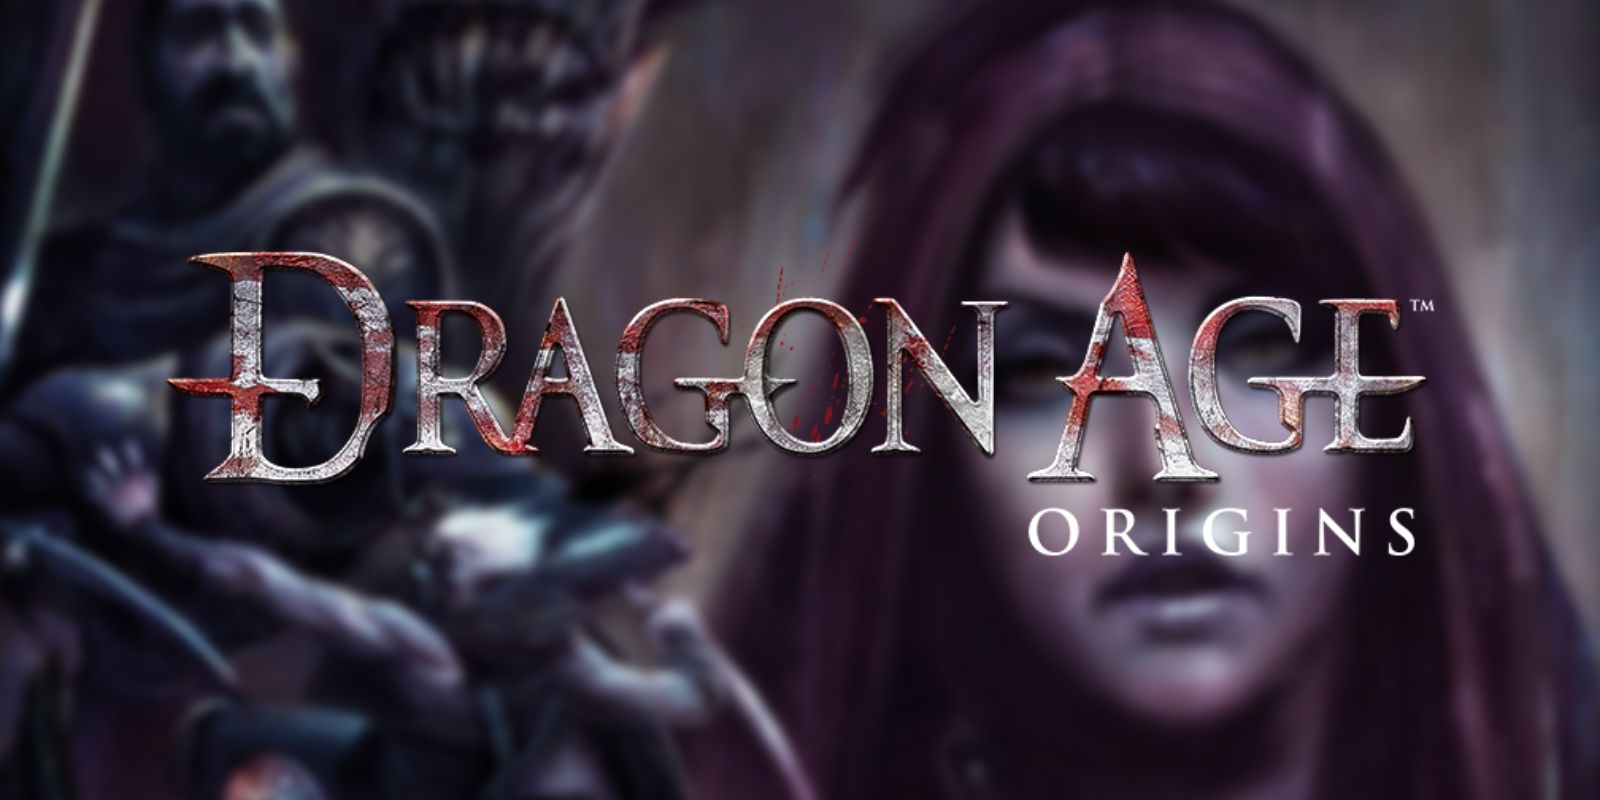 Dragon Age Origins title screen with blurry images of characters